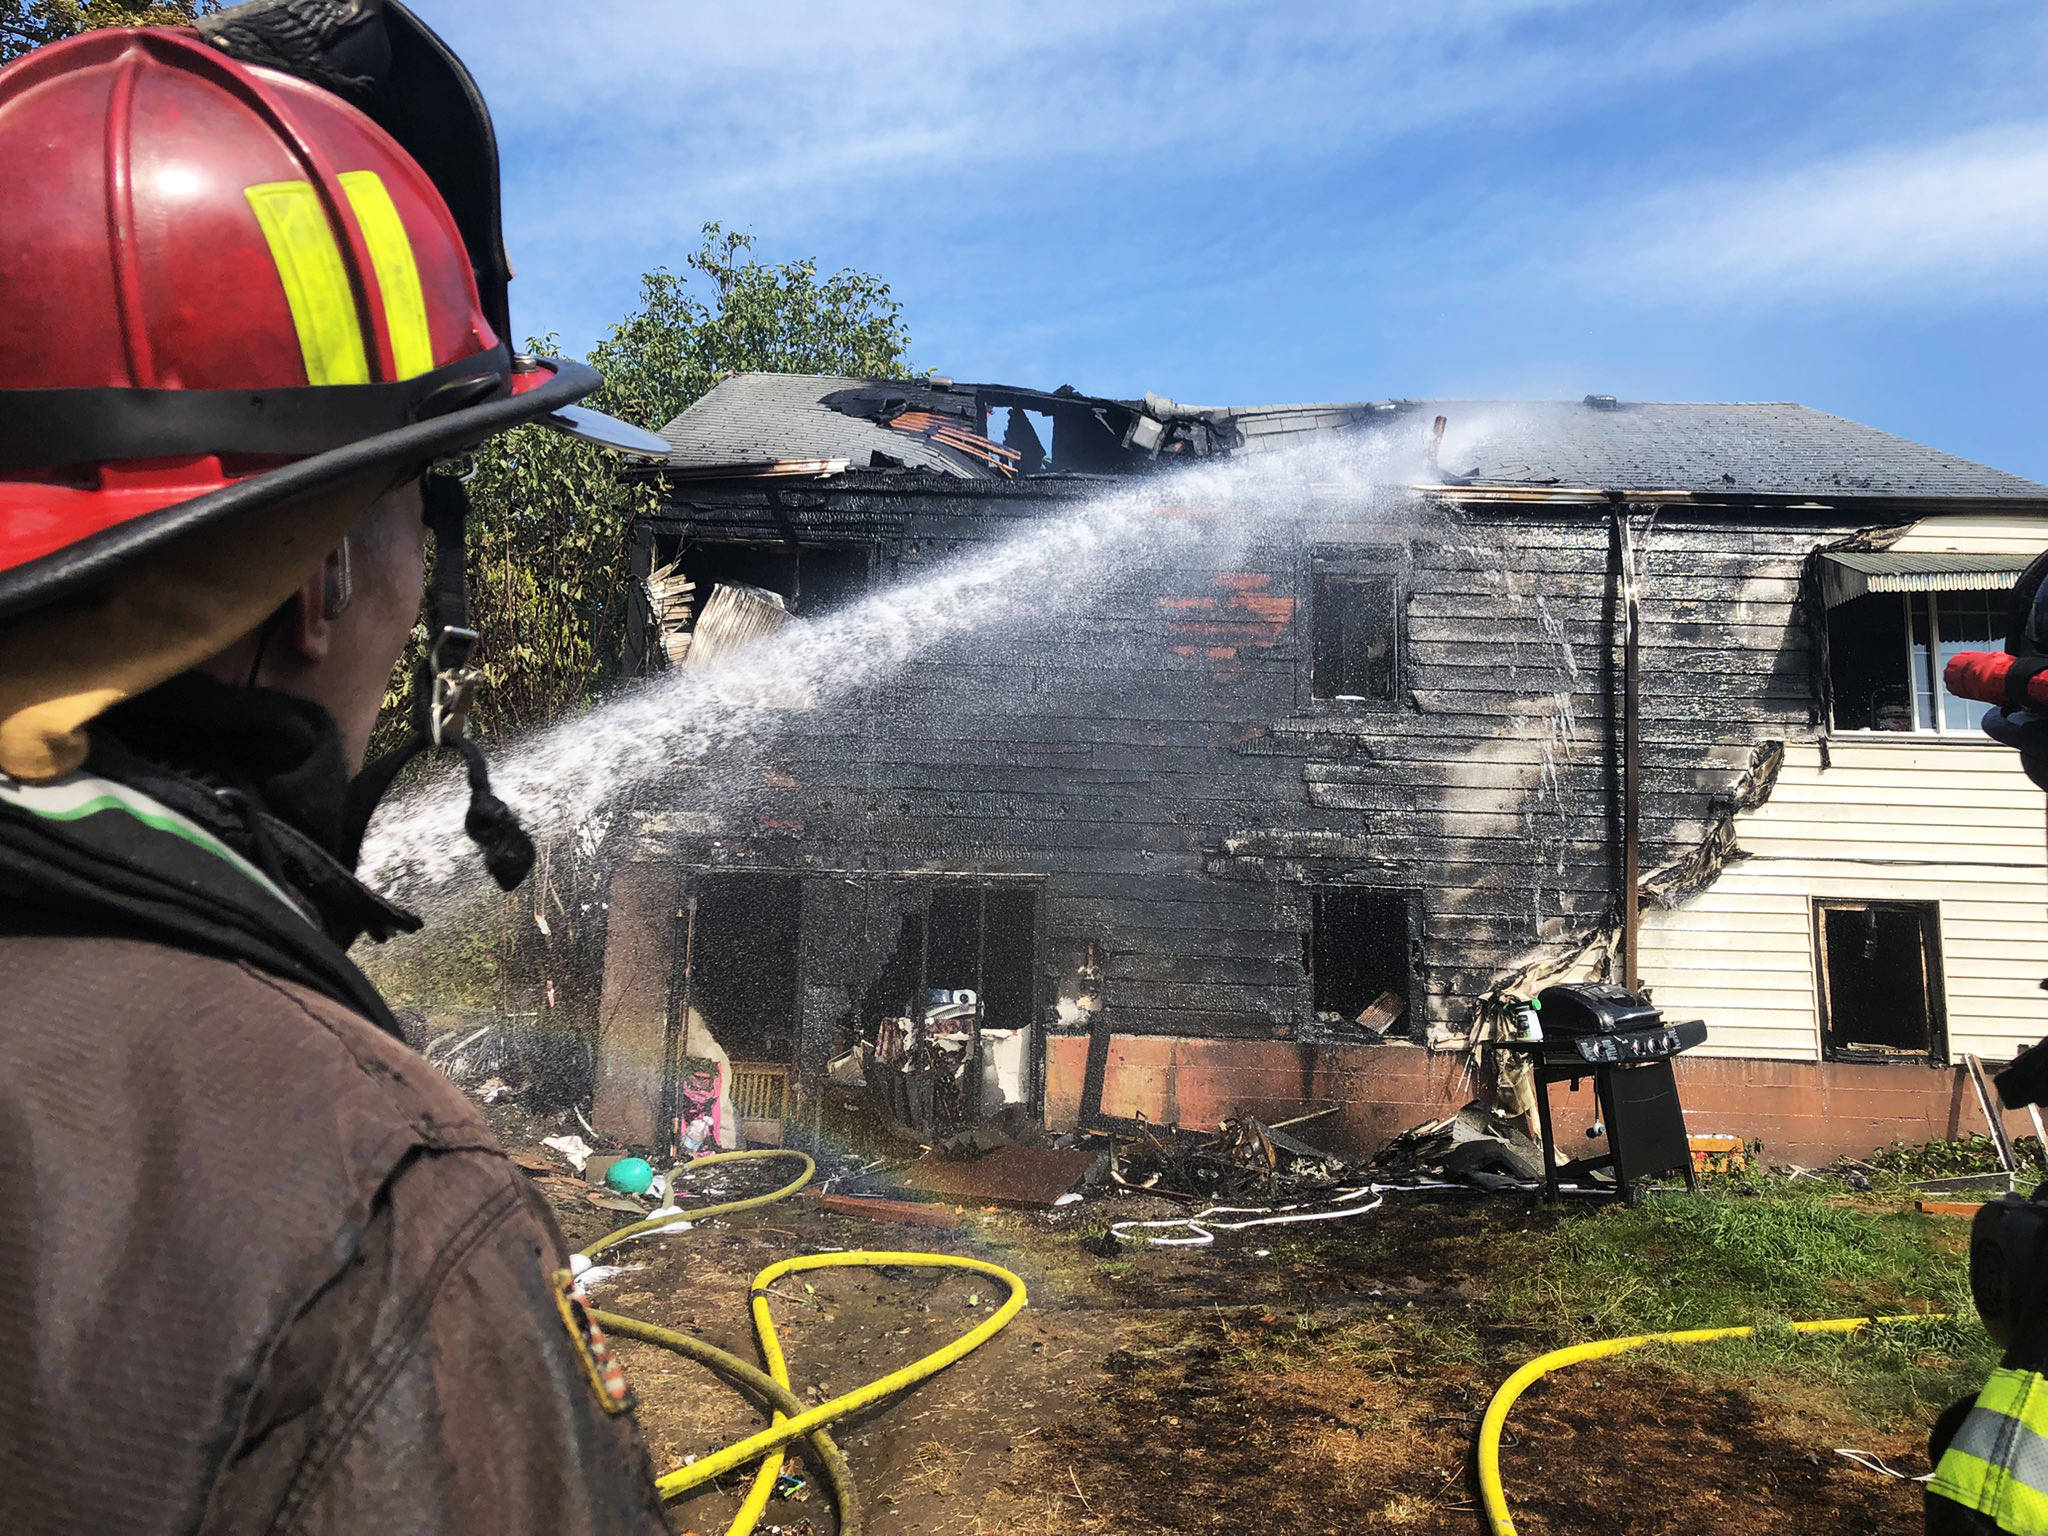 Puget Sound Fire battles a house fire Aug. 18 in the 600 block of Prospect Avenue in Kent. COURTESY PHOTO, Puget Sound Fire